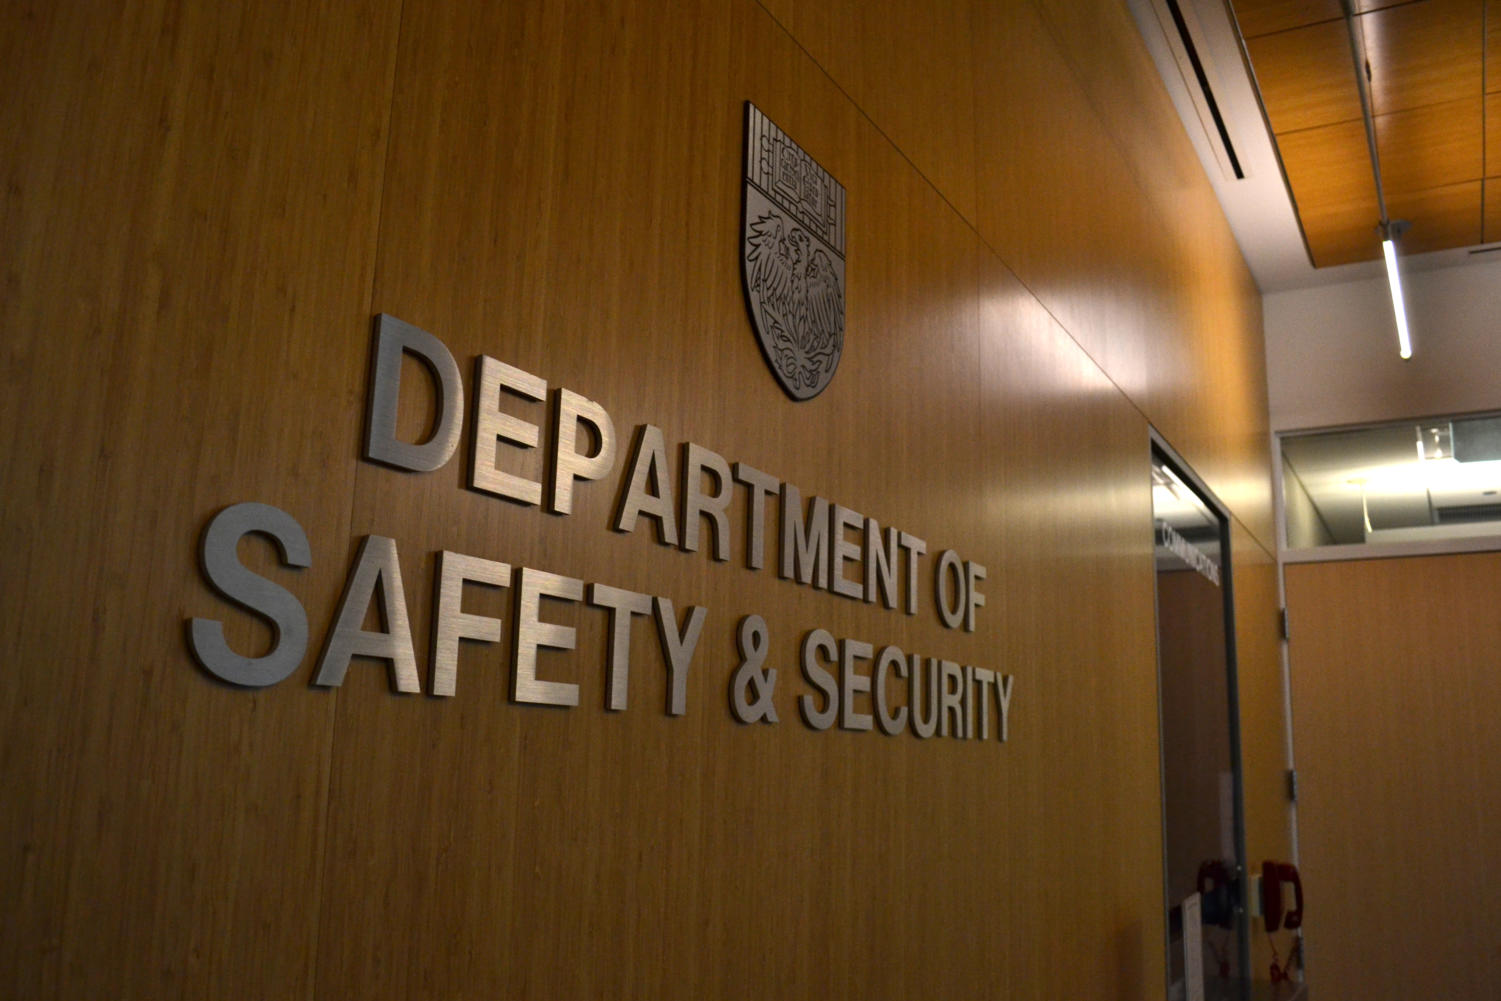 The Department of Safety and Security at 850 E. 61st Street.